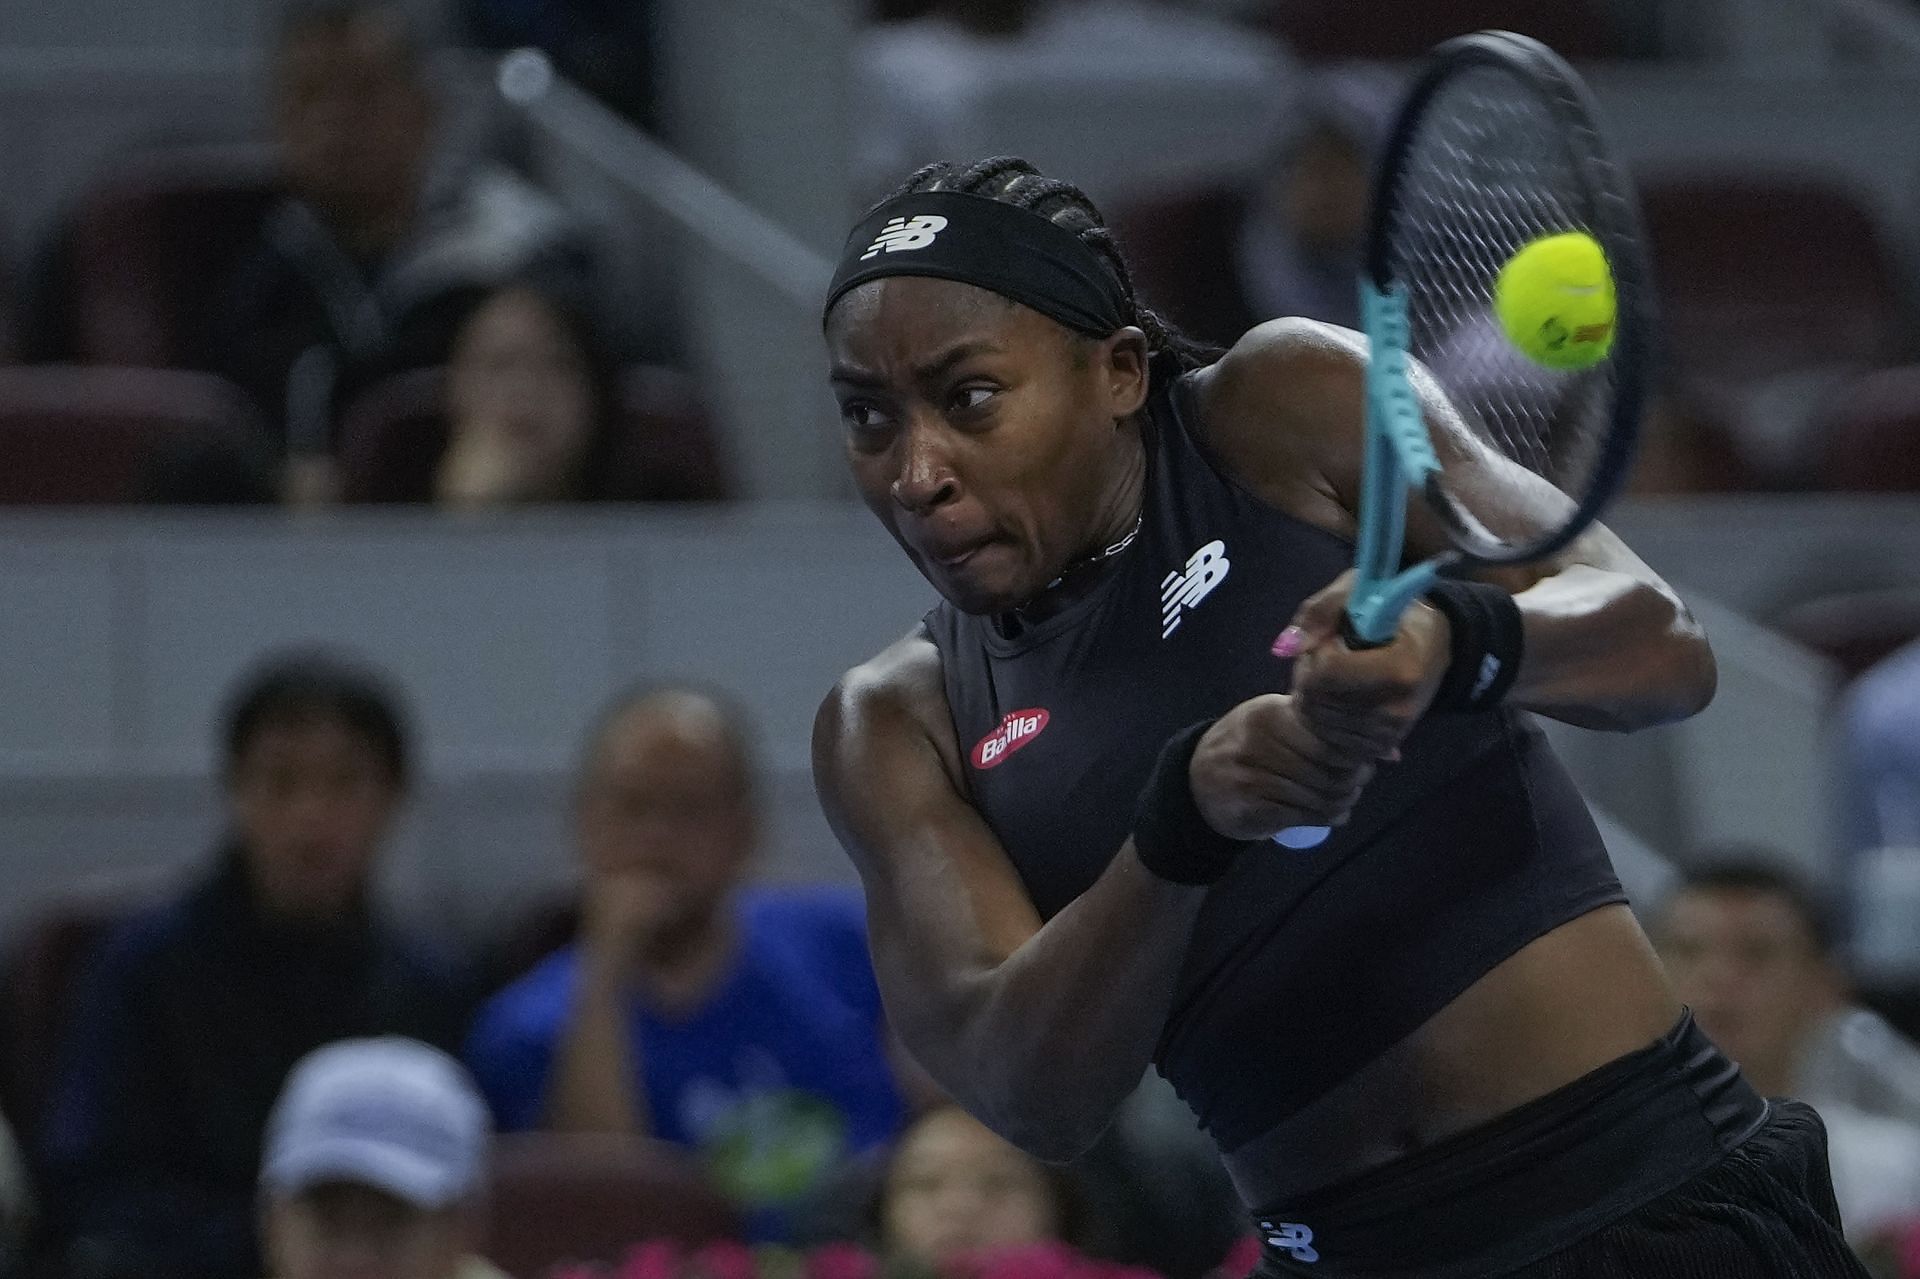 Cooc Gauff at the 2023 China Open.